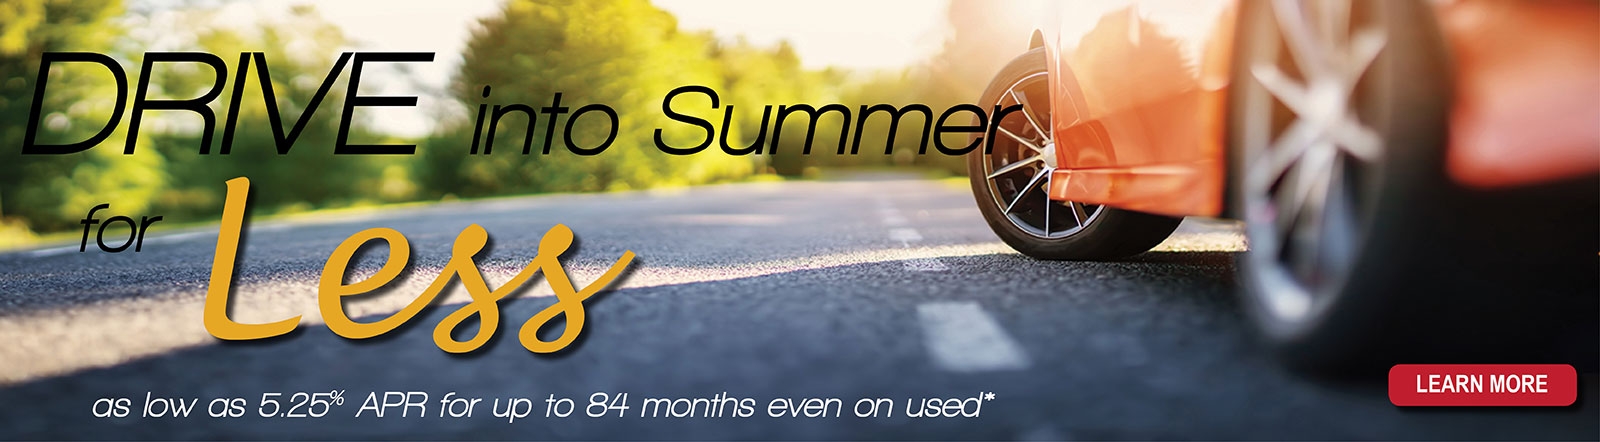 Drive into summer for less with vehicle loan rates as low as 5.25 percent APR for up to 84 months even on used.